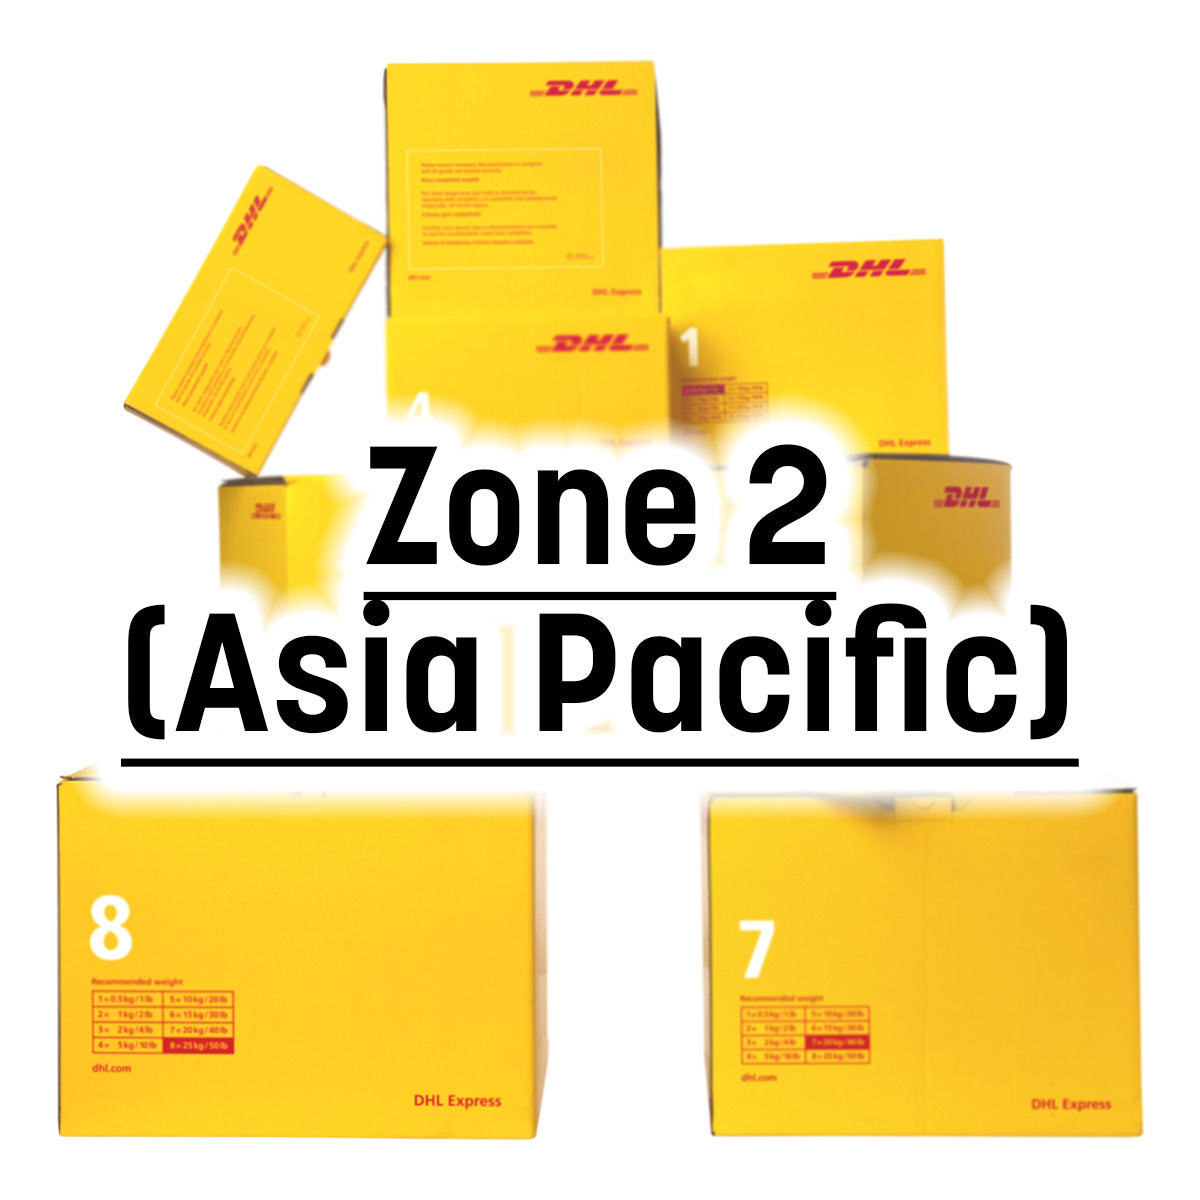 DHL Express Easy Singapore to Overseas Delivery Service, Zone 2 (Asia Pacific)